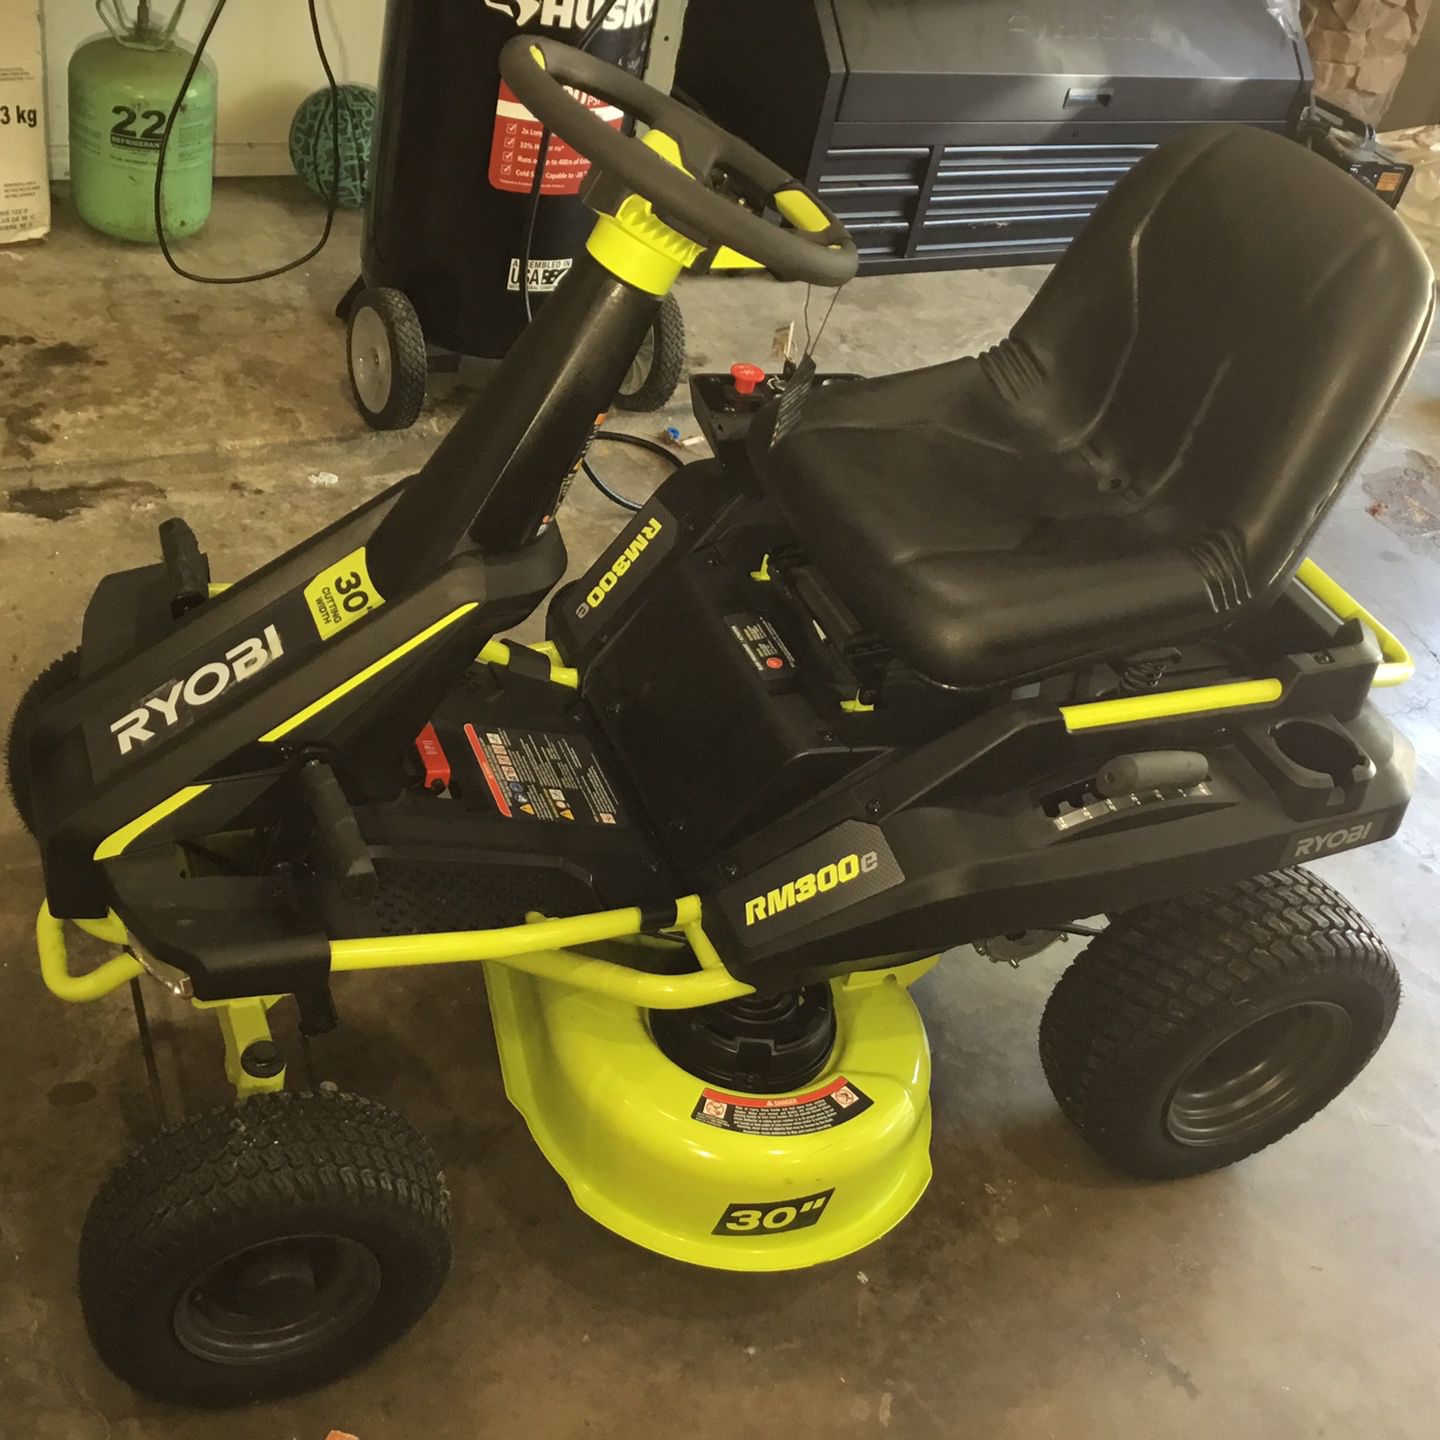 New Condition!  Ryobi 48V  Brushless 30” Battery Electric Rear Engine riding Mower!!  Model RM300e NEW With Charger, Retails $2999…. Only $1545 👍🏽